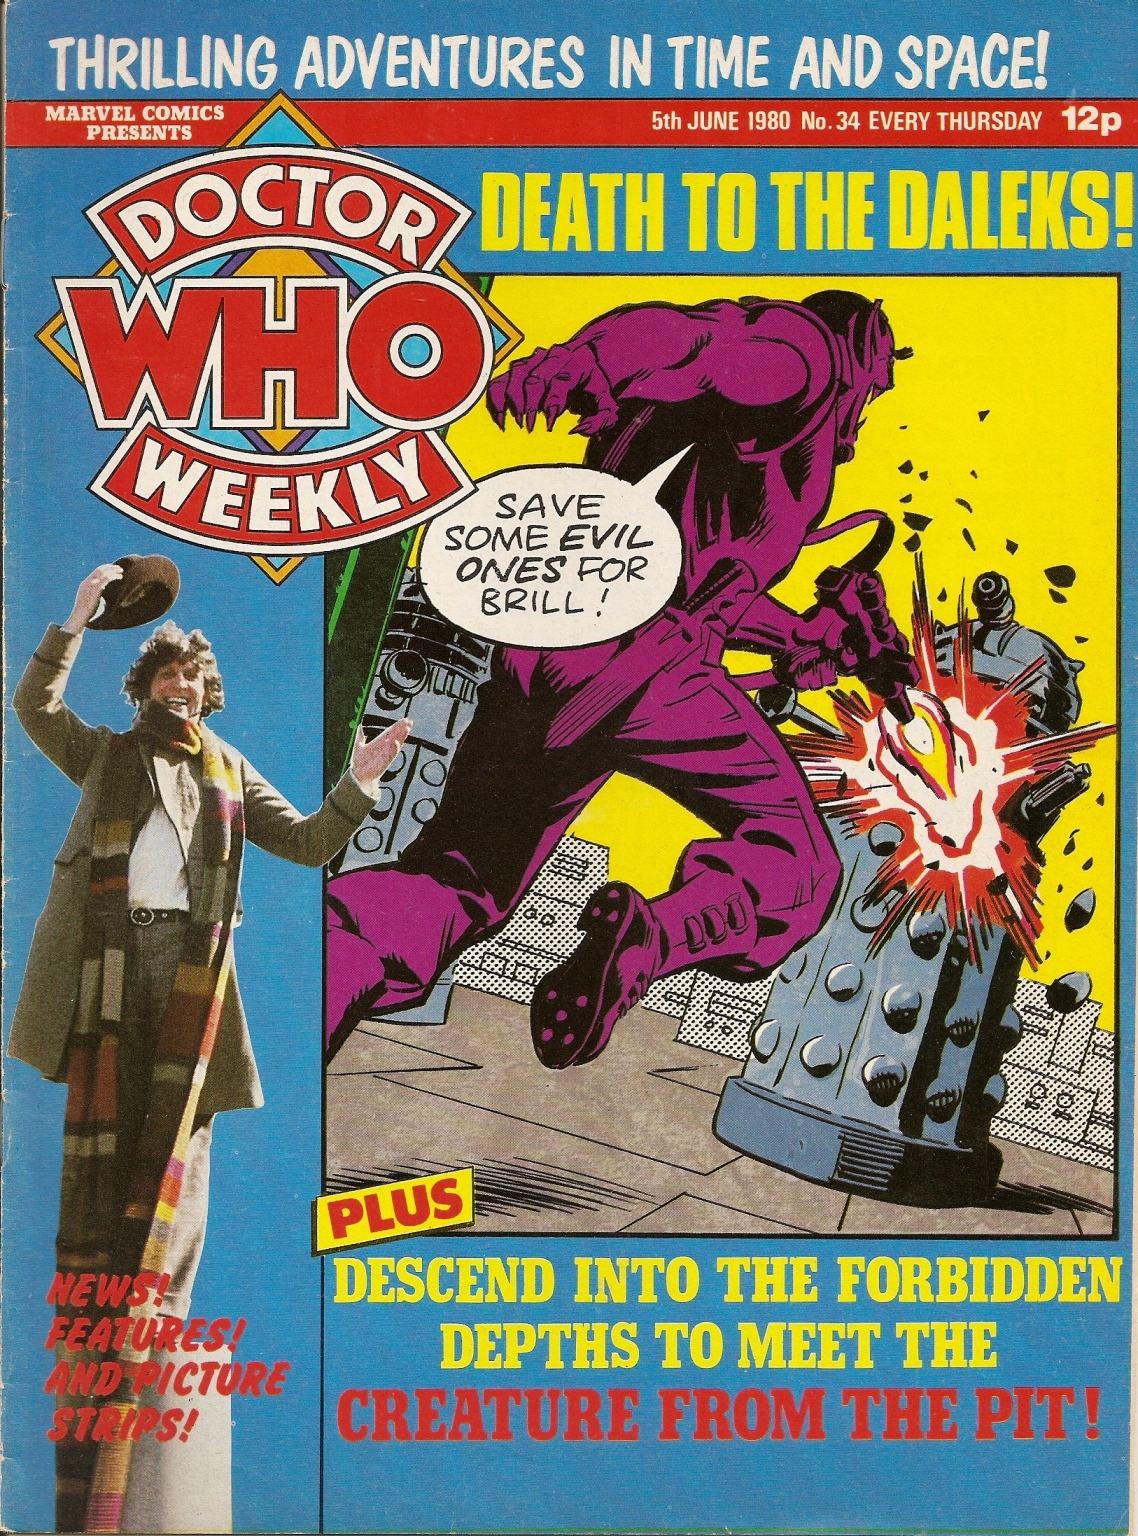 Doctor Who Weekly - Issue 34 - 5th June 1980